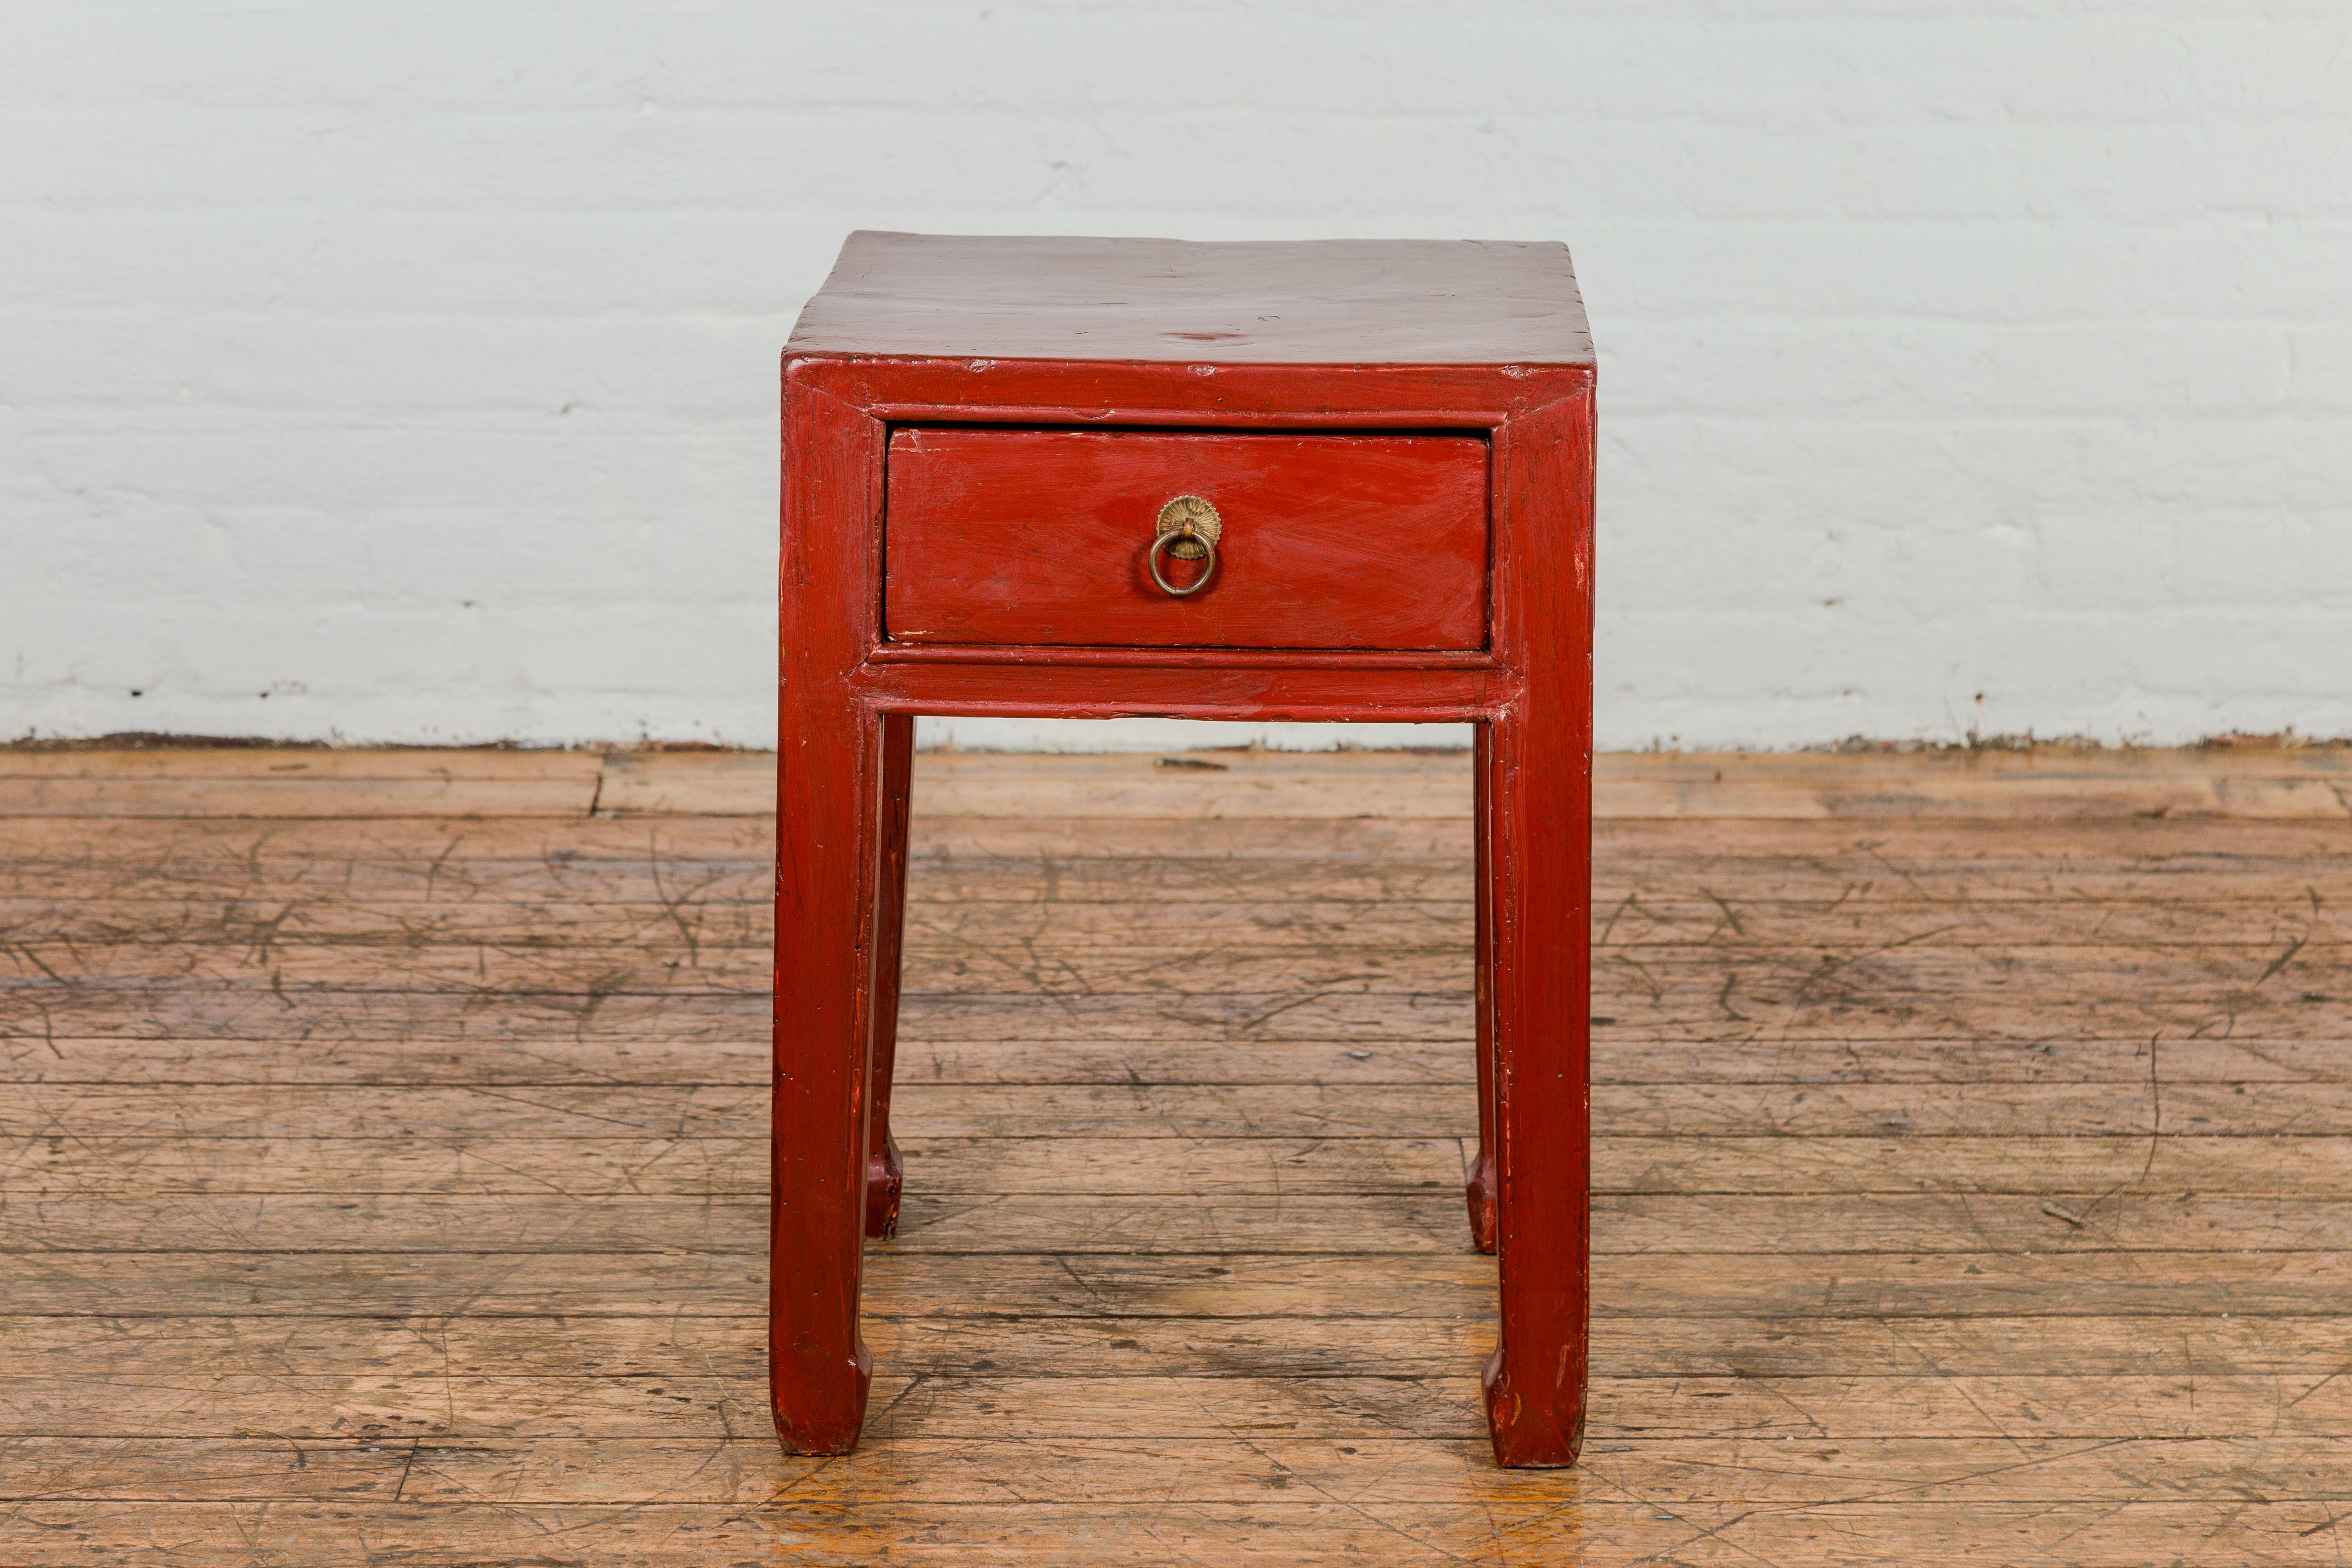 A late Qing Dynasty period red lacquer wooden side table from the early 20th century with single drawer and horse hoof feet. This late Qing Dynasty period side table dates back to the early 20th century and is steeped in rich Chinese history. The